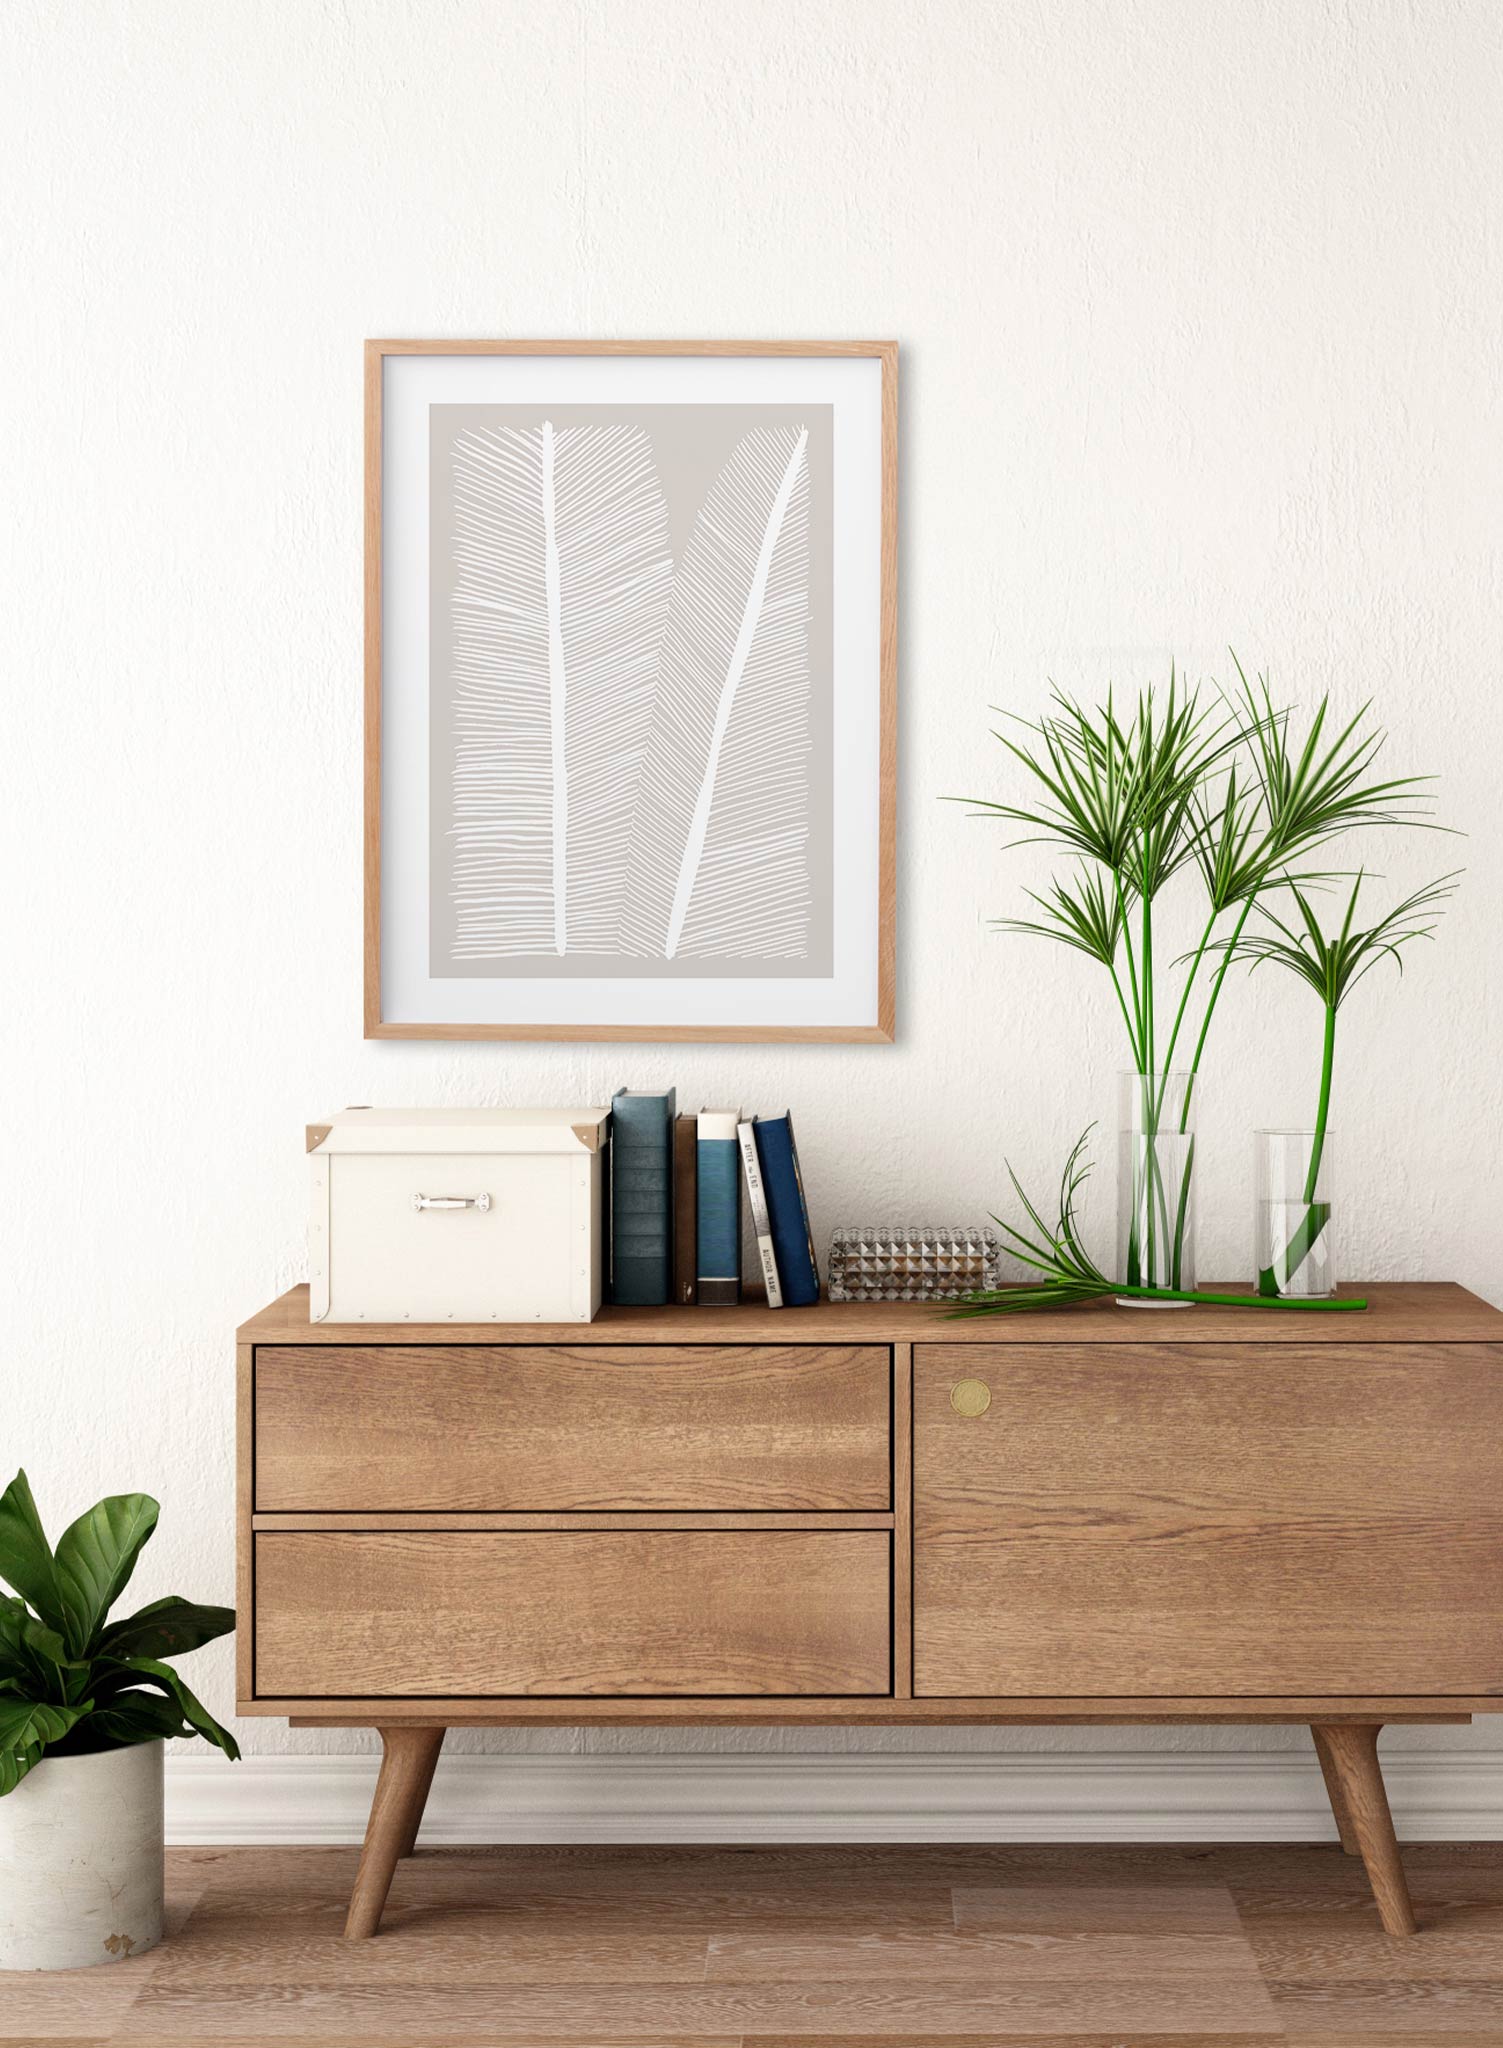 Feathered is a minimalist illustration by Opposite Wall of two white and sparse feathers.